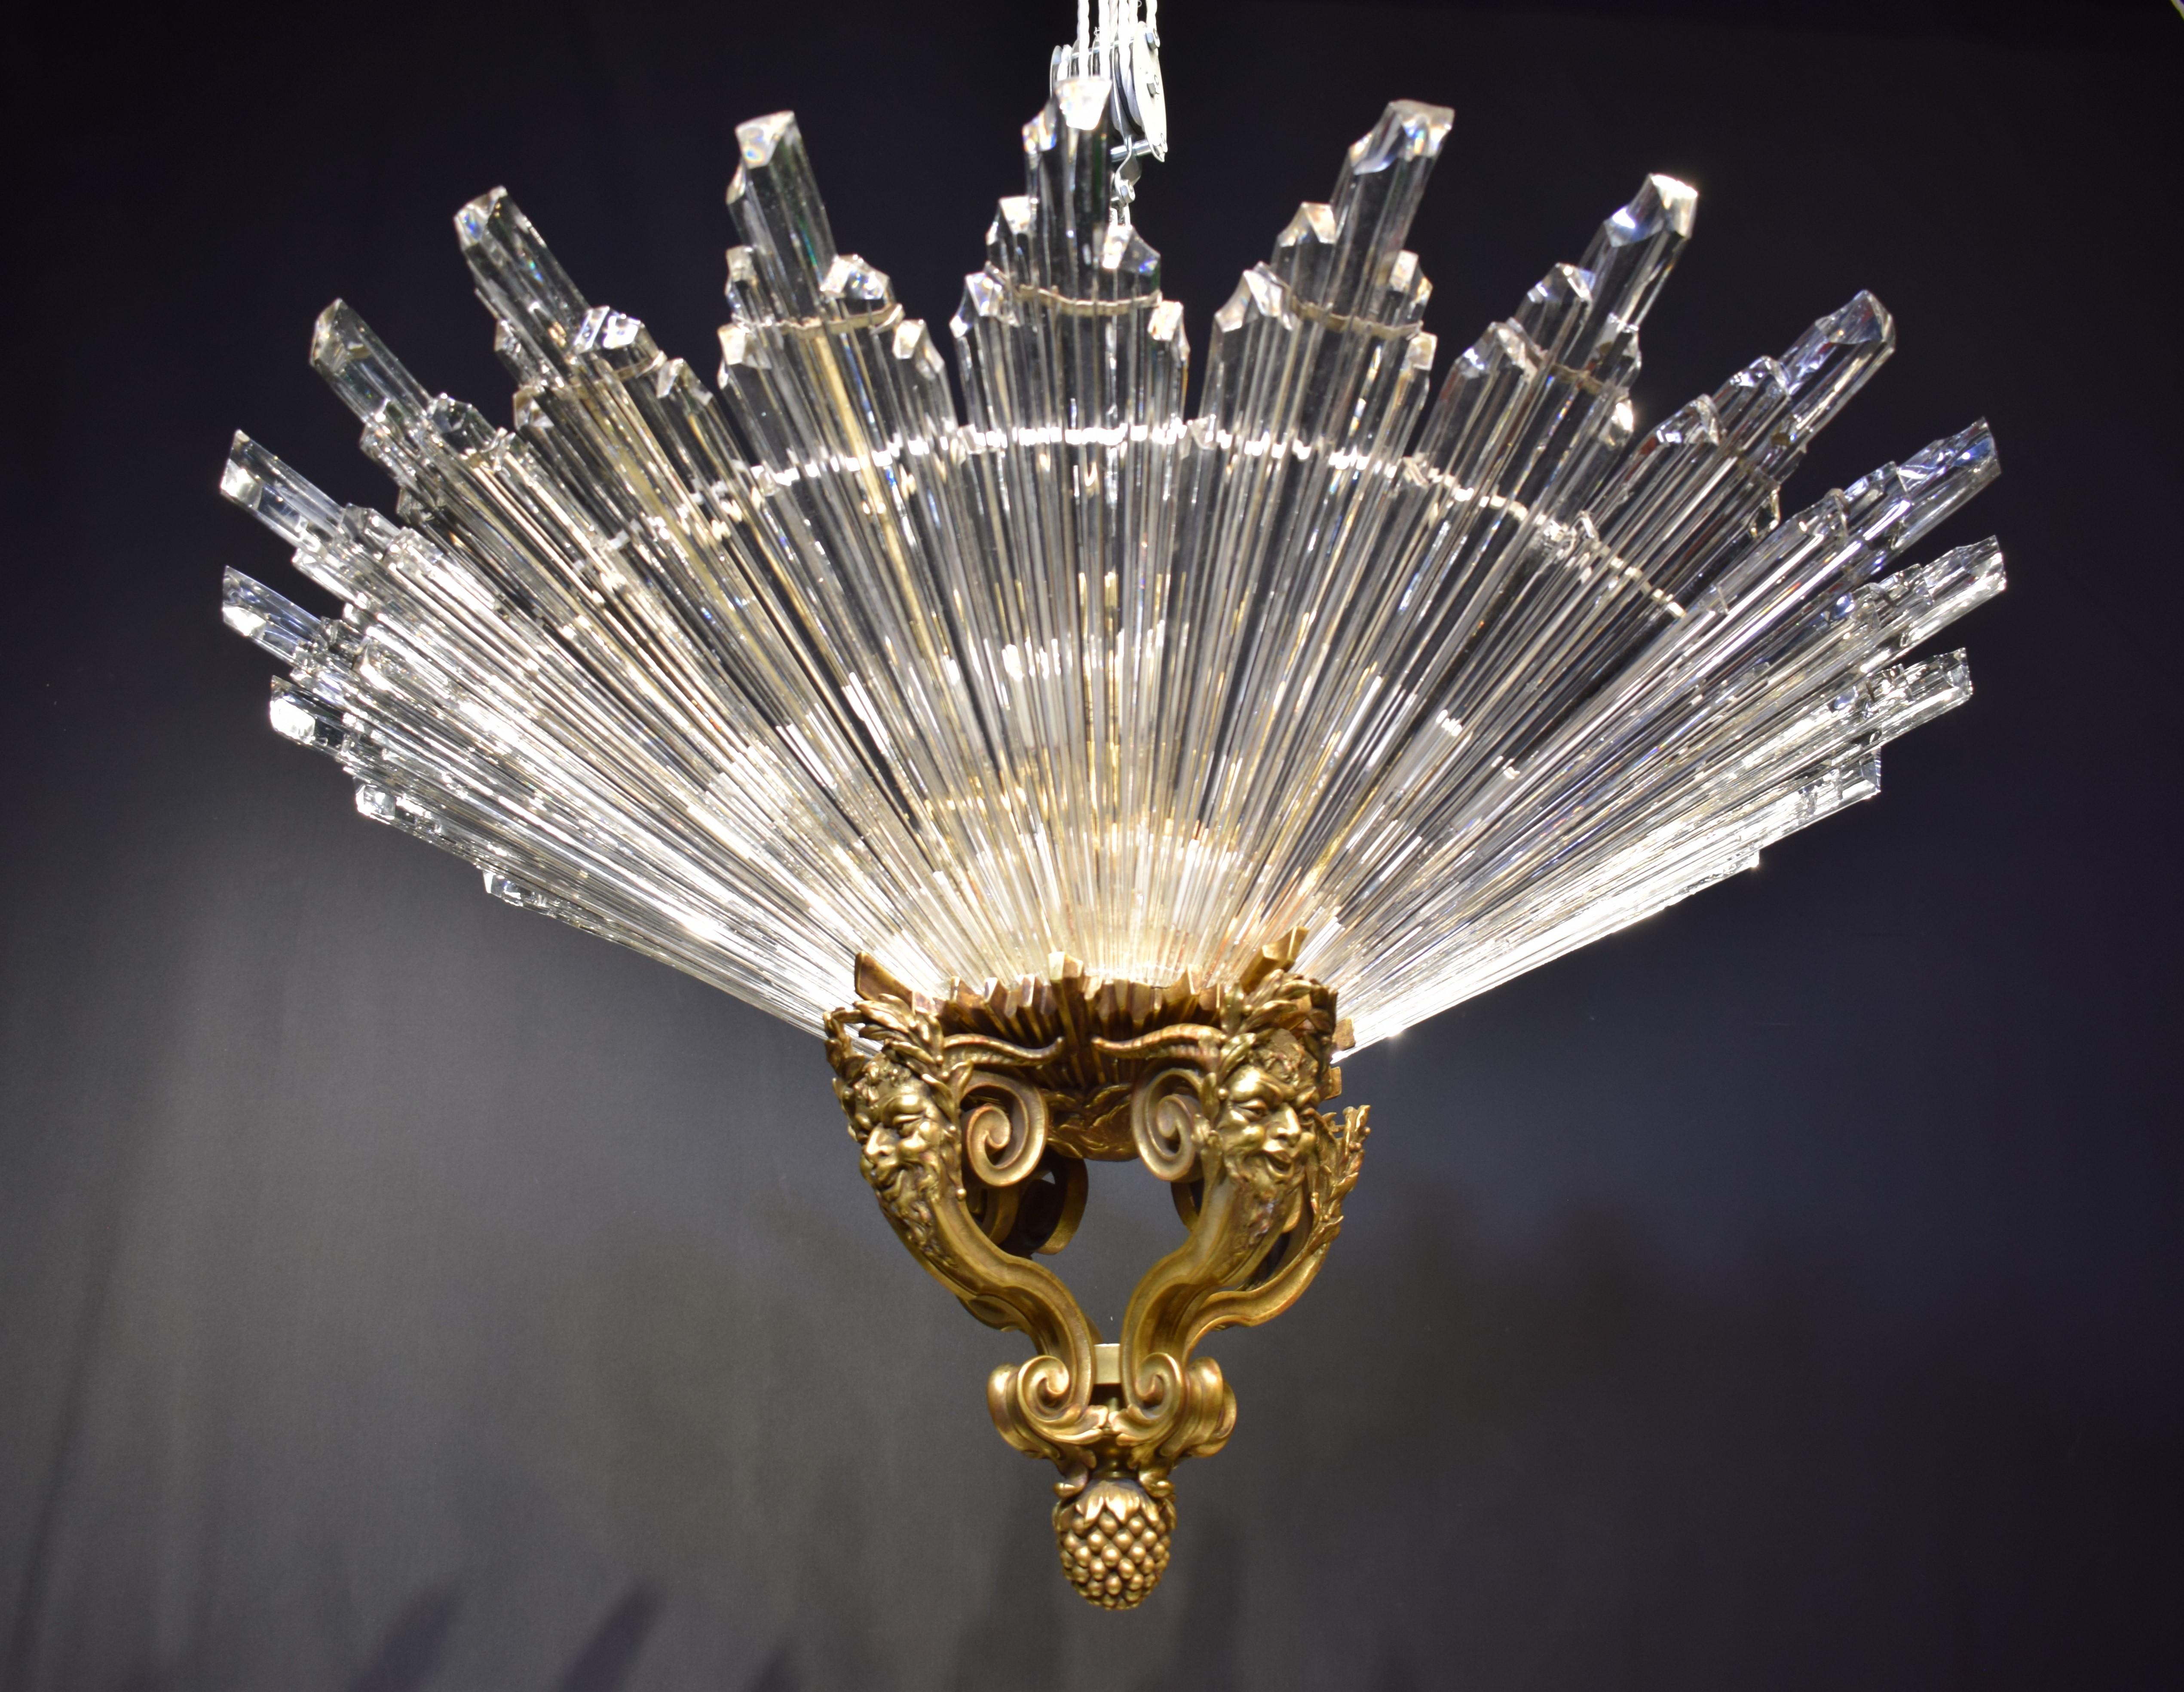 A Magnificent Gilt Bronze & Crystal Chandelier featuring crystal rays at the bottom, gilt bronze ornament depicting male faces. France, circa 1900.
Dimensions: Height 20